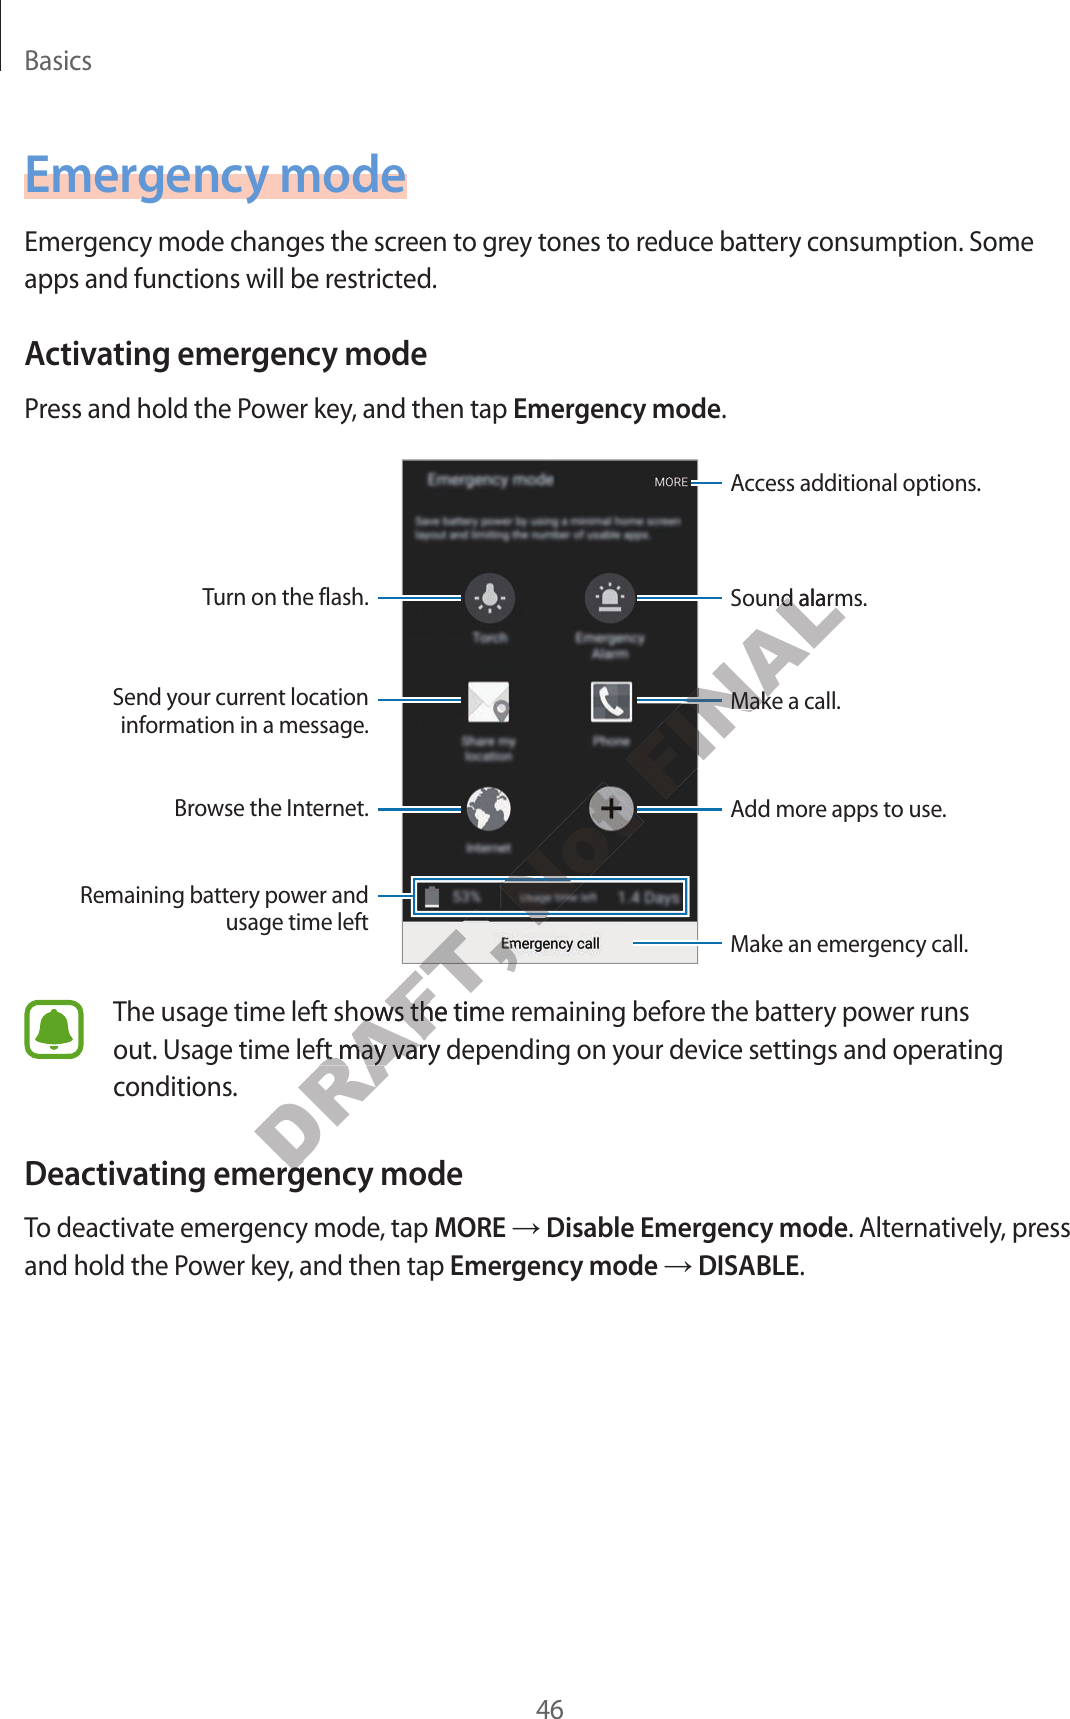 Basics46Emergency modeEmergency mode changes the screen to gr ey t ones to r educ e batt ery consumption. Some apps and functions will be restricted.Activating emer gency modePr ess and hold the Power key, and then tap Emergency mode.Add mor e apps to use .Make an emergency call.Remaining battery power and usage time leftTurn on the flash.Make a call.Send your current location information in a message .Brow se the Internet.Acc ess additional options .Sound alarms.The usage time left shows the time r emaining bef or e the batt ery power runs out. Usage time left may vary depending on your device settings and operating conditions.Deactivating emer gency modeTo deactivate emergency mode, tap MORE → Disable Emergency mode. Alternativ ely, press and hold the P o w er key, and then tap Emergency mode → DISABLE.DRAFT, DRAFT, DRAFT, DRAFT, DRAFT, DRAFT, DRAFT, The usage time left shows the time r emaining bef or e the batt ery power runs DRAFT, The usage time left shows the time r emaining bef or e the batt ery power runs out. Usage time left may vary depending on your device settings and operating DRAFT, out. Usage time left may vary depending on your device settings and operating Deactivating emer gency modeDRAFT, Deactivating emer gency modeNot Not Not FINALFINALFINALFINALFINALMake a call.FINALMake a call.Sound alarms.FINALSound alarms.